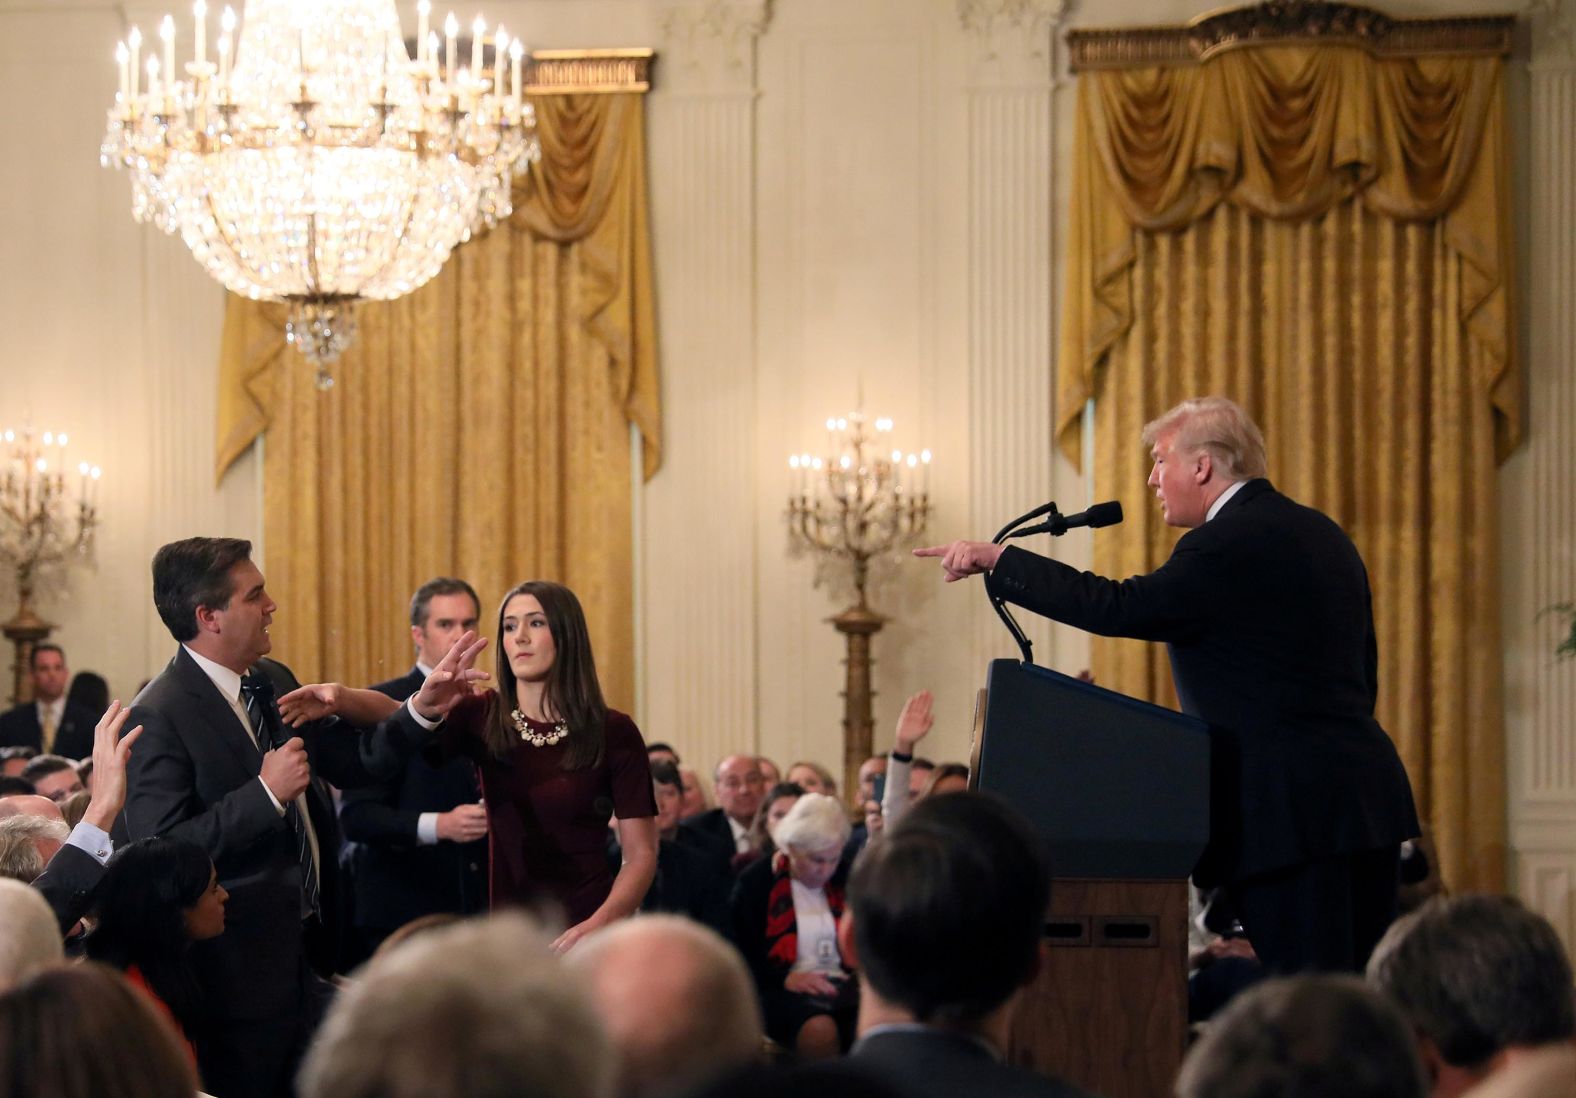 A White House staff member reaches for the microphone held by CNN's Jim Acosta as he questions Trump during a news conference in November 2018. Later that day, in a stunning break with protocol, the White House said that it was <a href="index.php?page=&url=https%3A%2F%2Fwww.cnn.com%2F2018%2F11%2F07%2Fmedia%2Ftrump-cnn-press-conference%2Findex.html" target="_blank">suspending Acosta's press pass</a> "until further notice." A federal judge later ordered the White House <a href="index.php?page=&url=https%3A%2F%2Fwww.cnn.com%2F2018%2F11%2F16%2Fmedia%2Fcnn-trump-lawsuit-hearing%2Findex.html" target="_blank">to return Acosta's press pass.</a> 